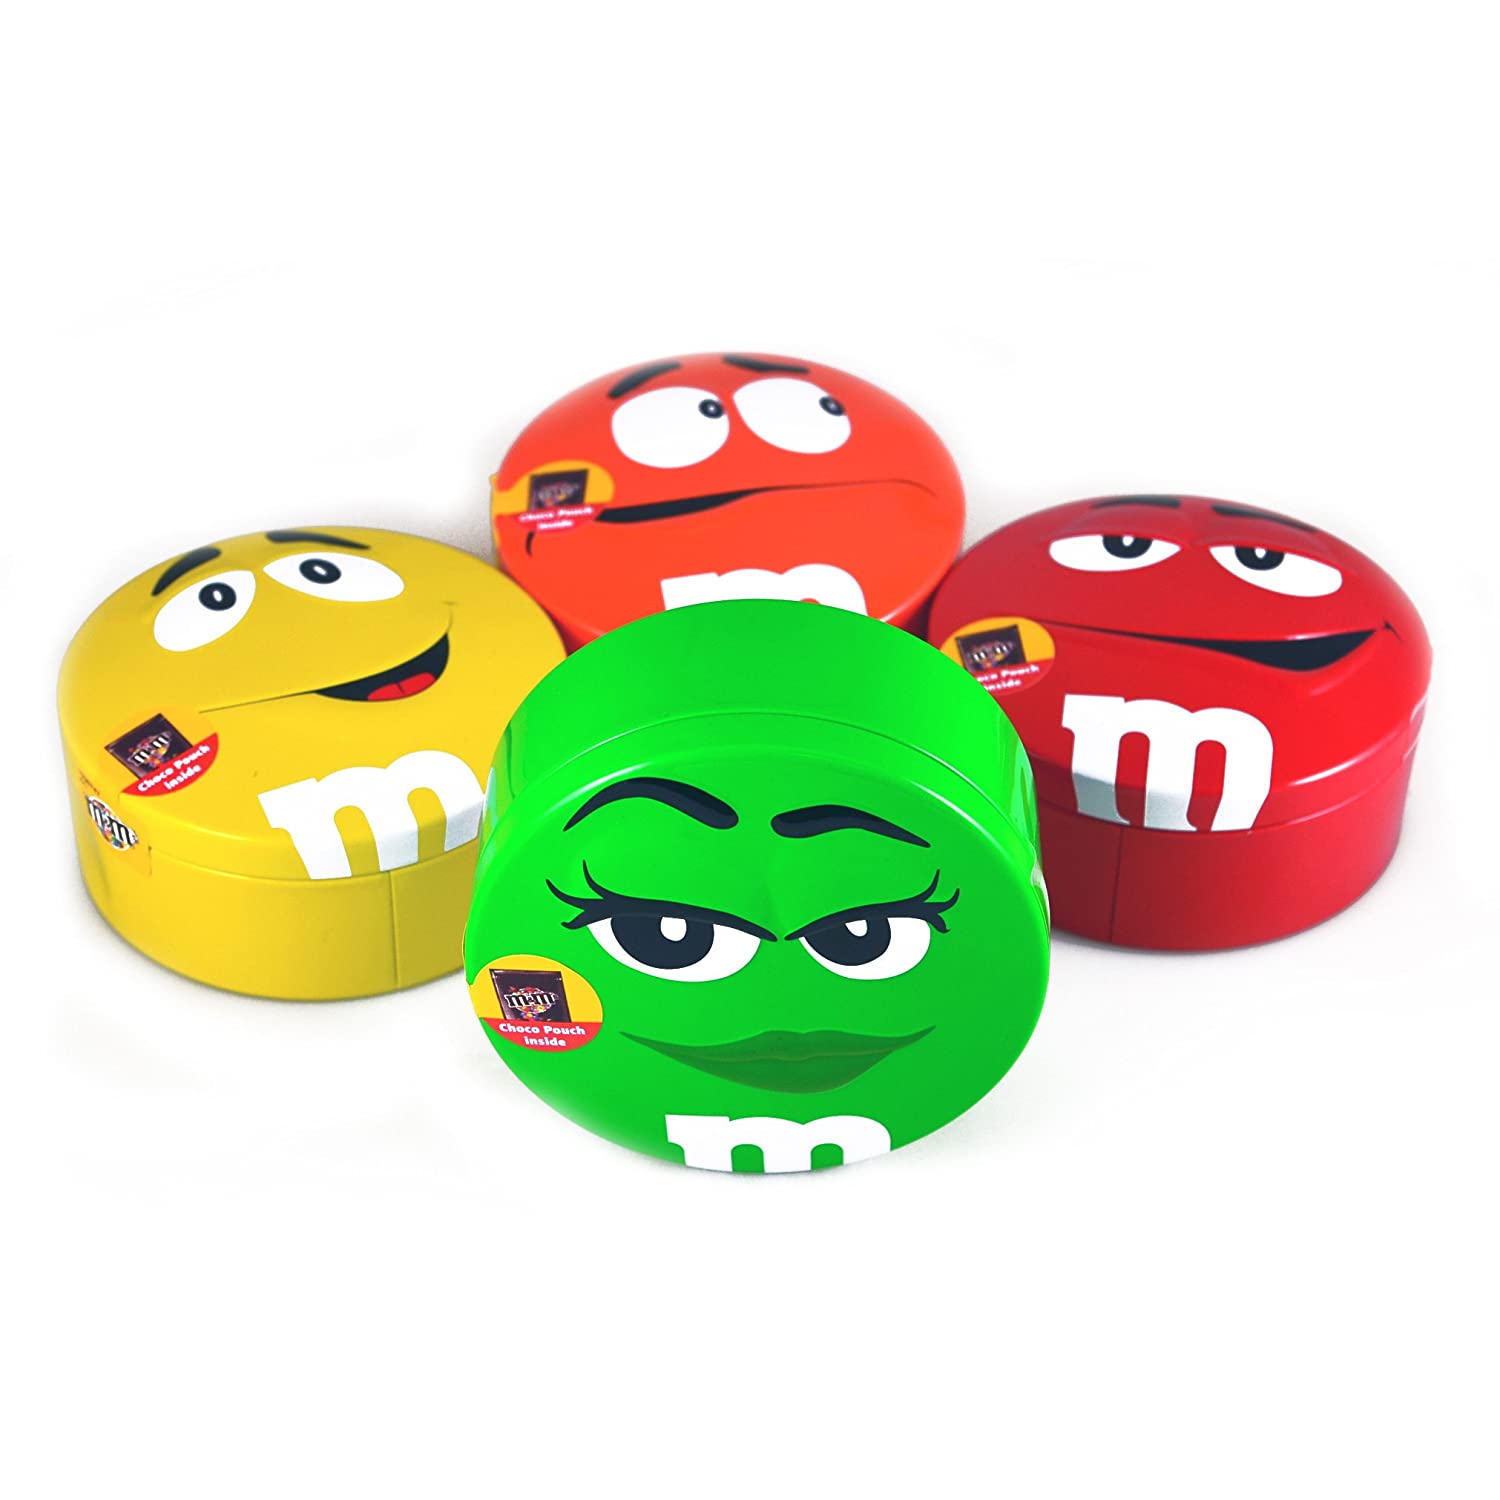 M&m's Red & Green 200g